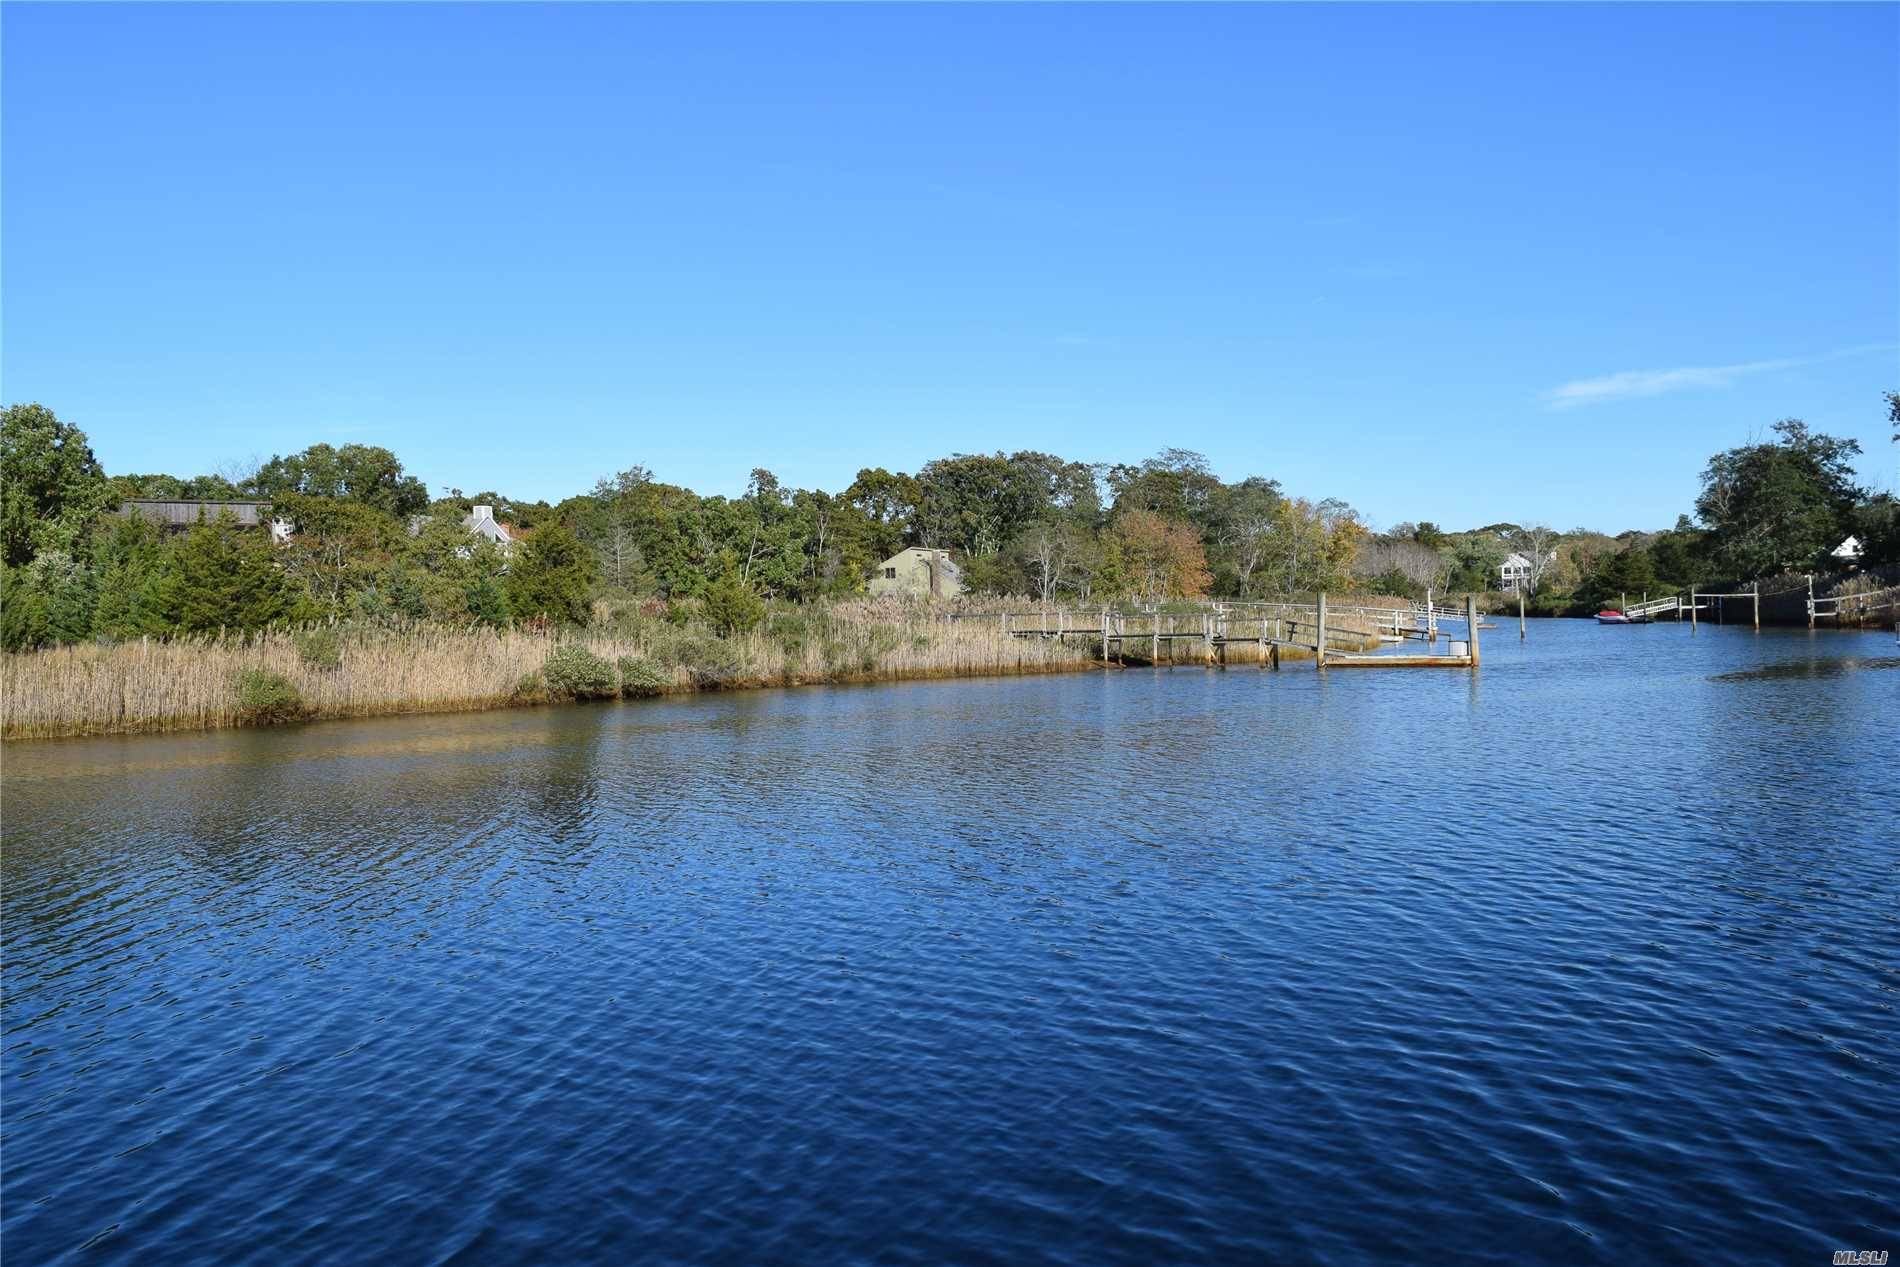 Close Proximity To Sag Harbor Village, This Waterfront Property Offers Approx.